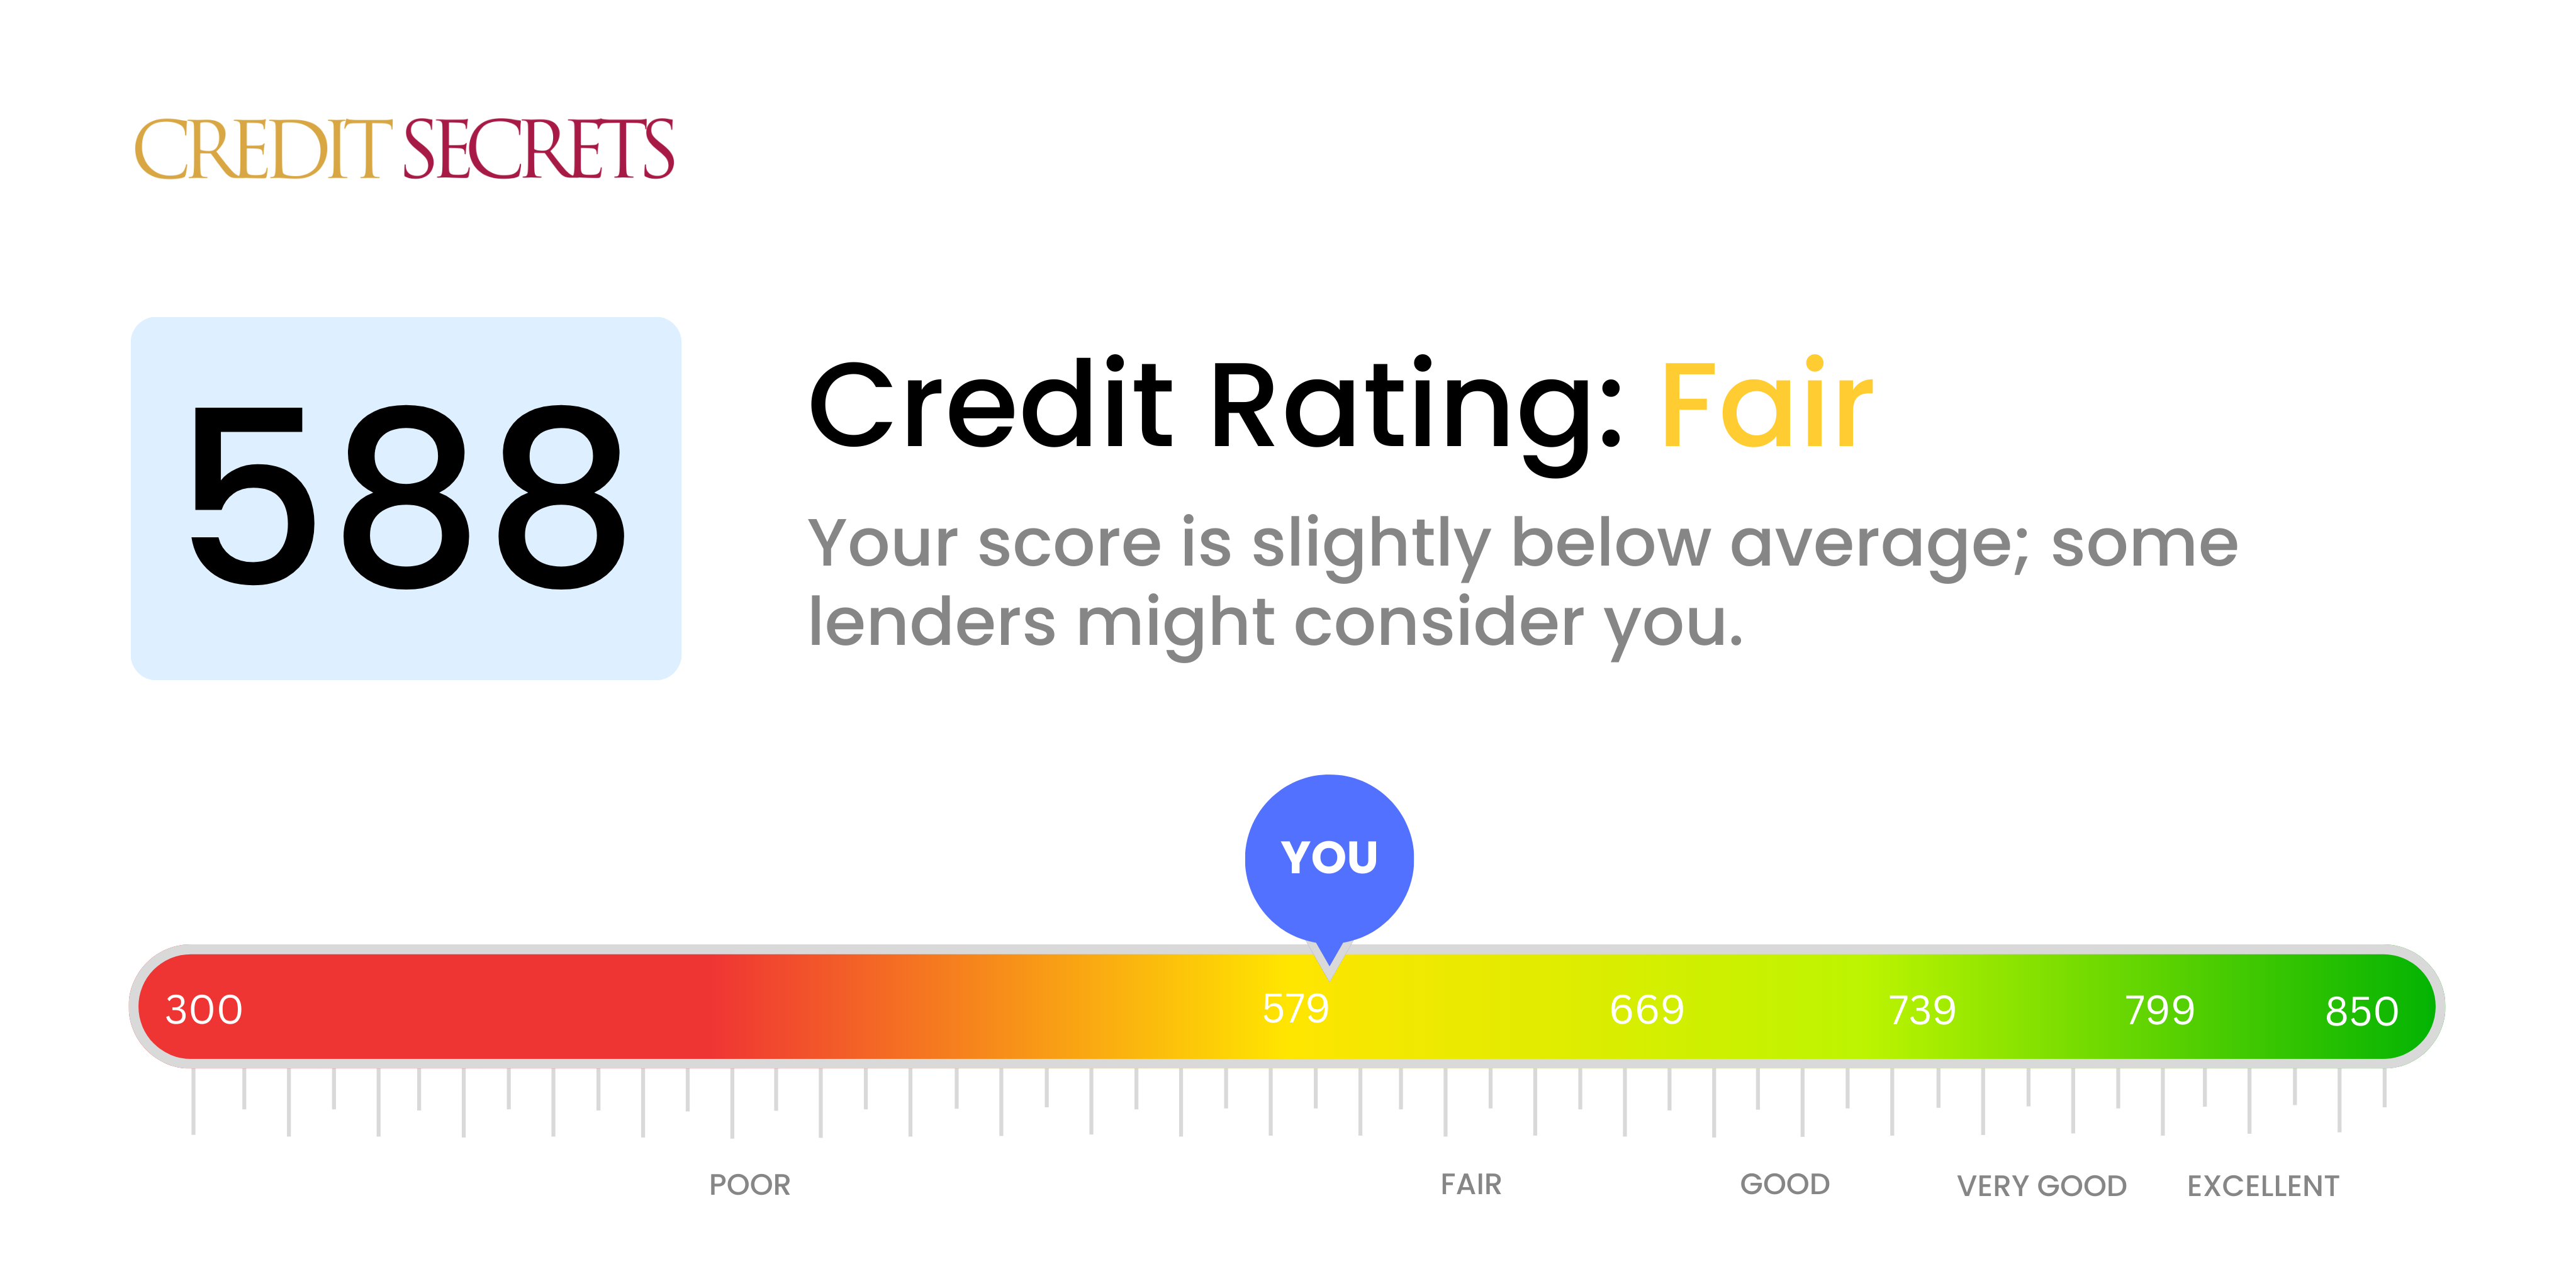 Is 588 a good credit score?